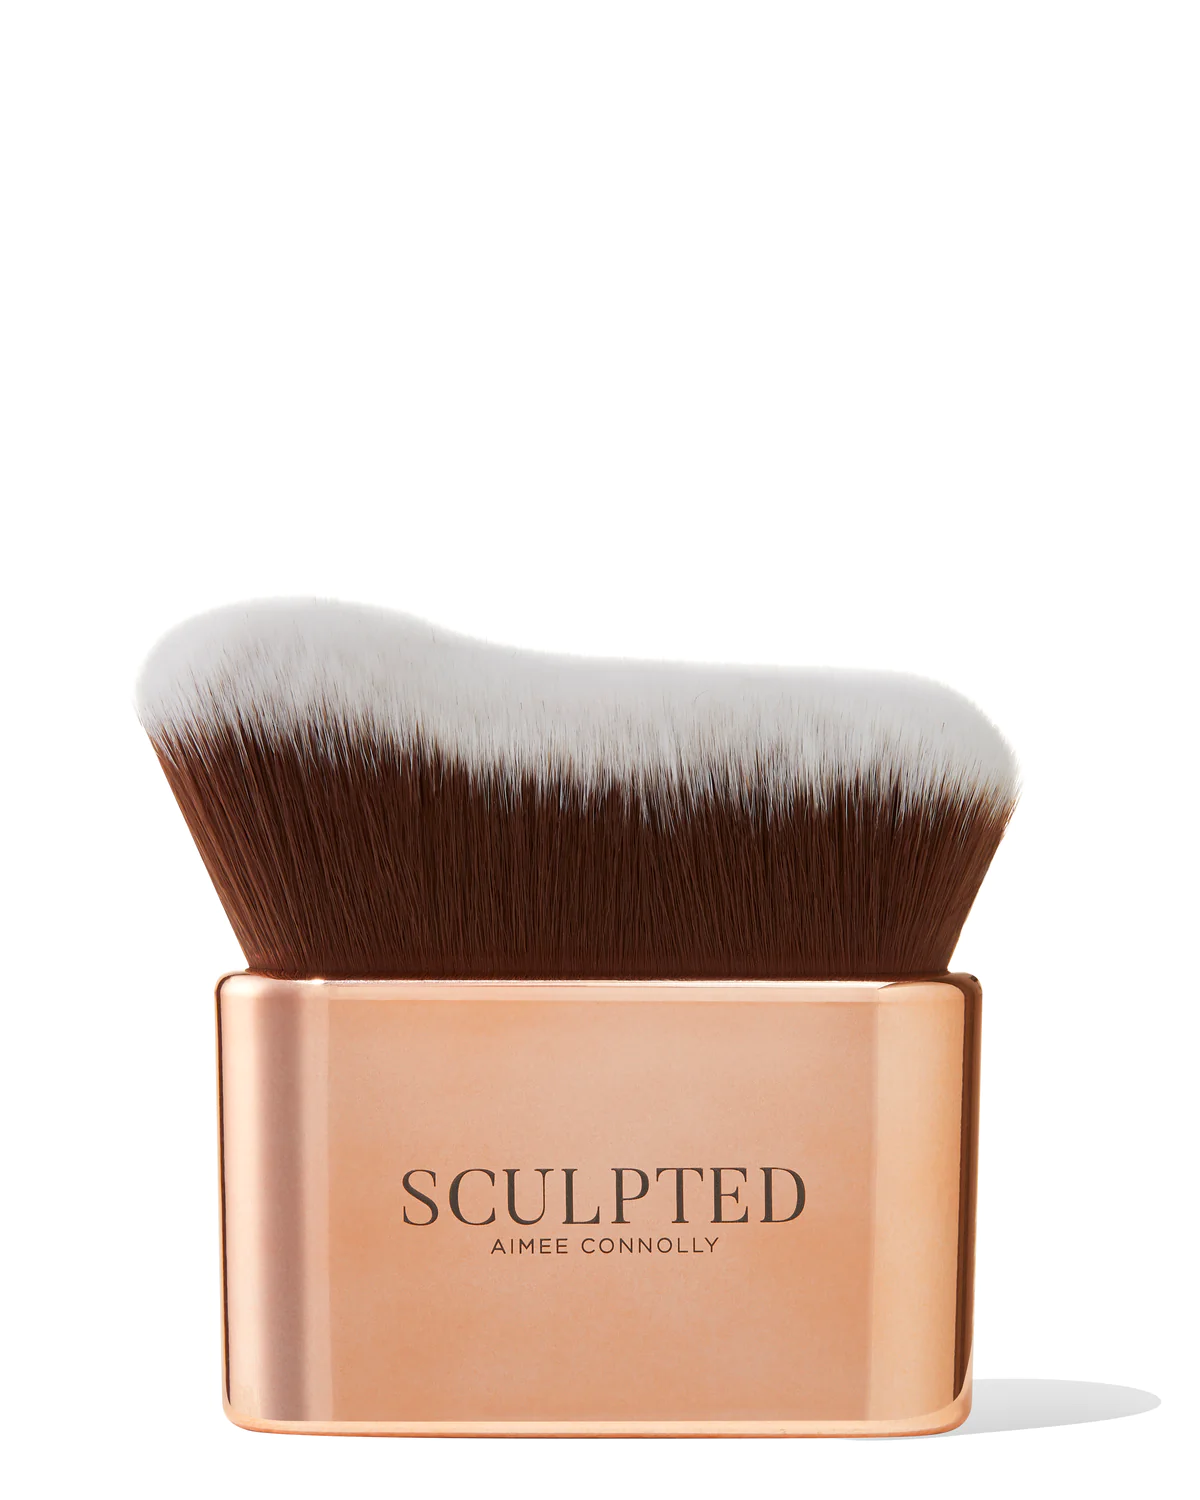 Sculpted By Aimee Connolly Deluxe Tanning Brush